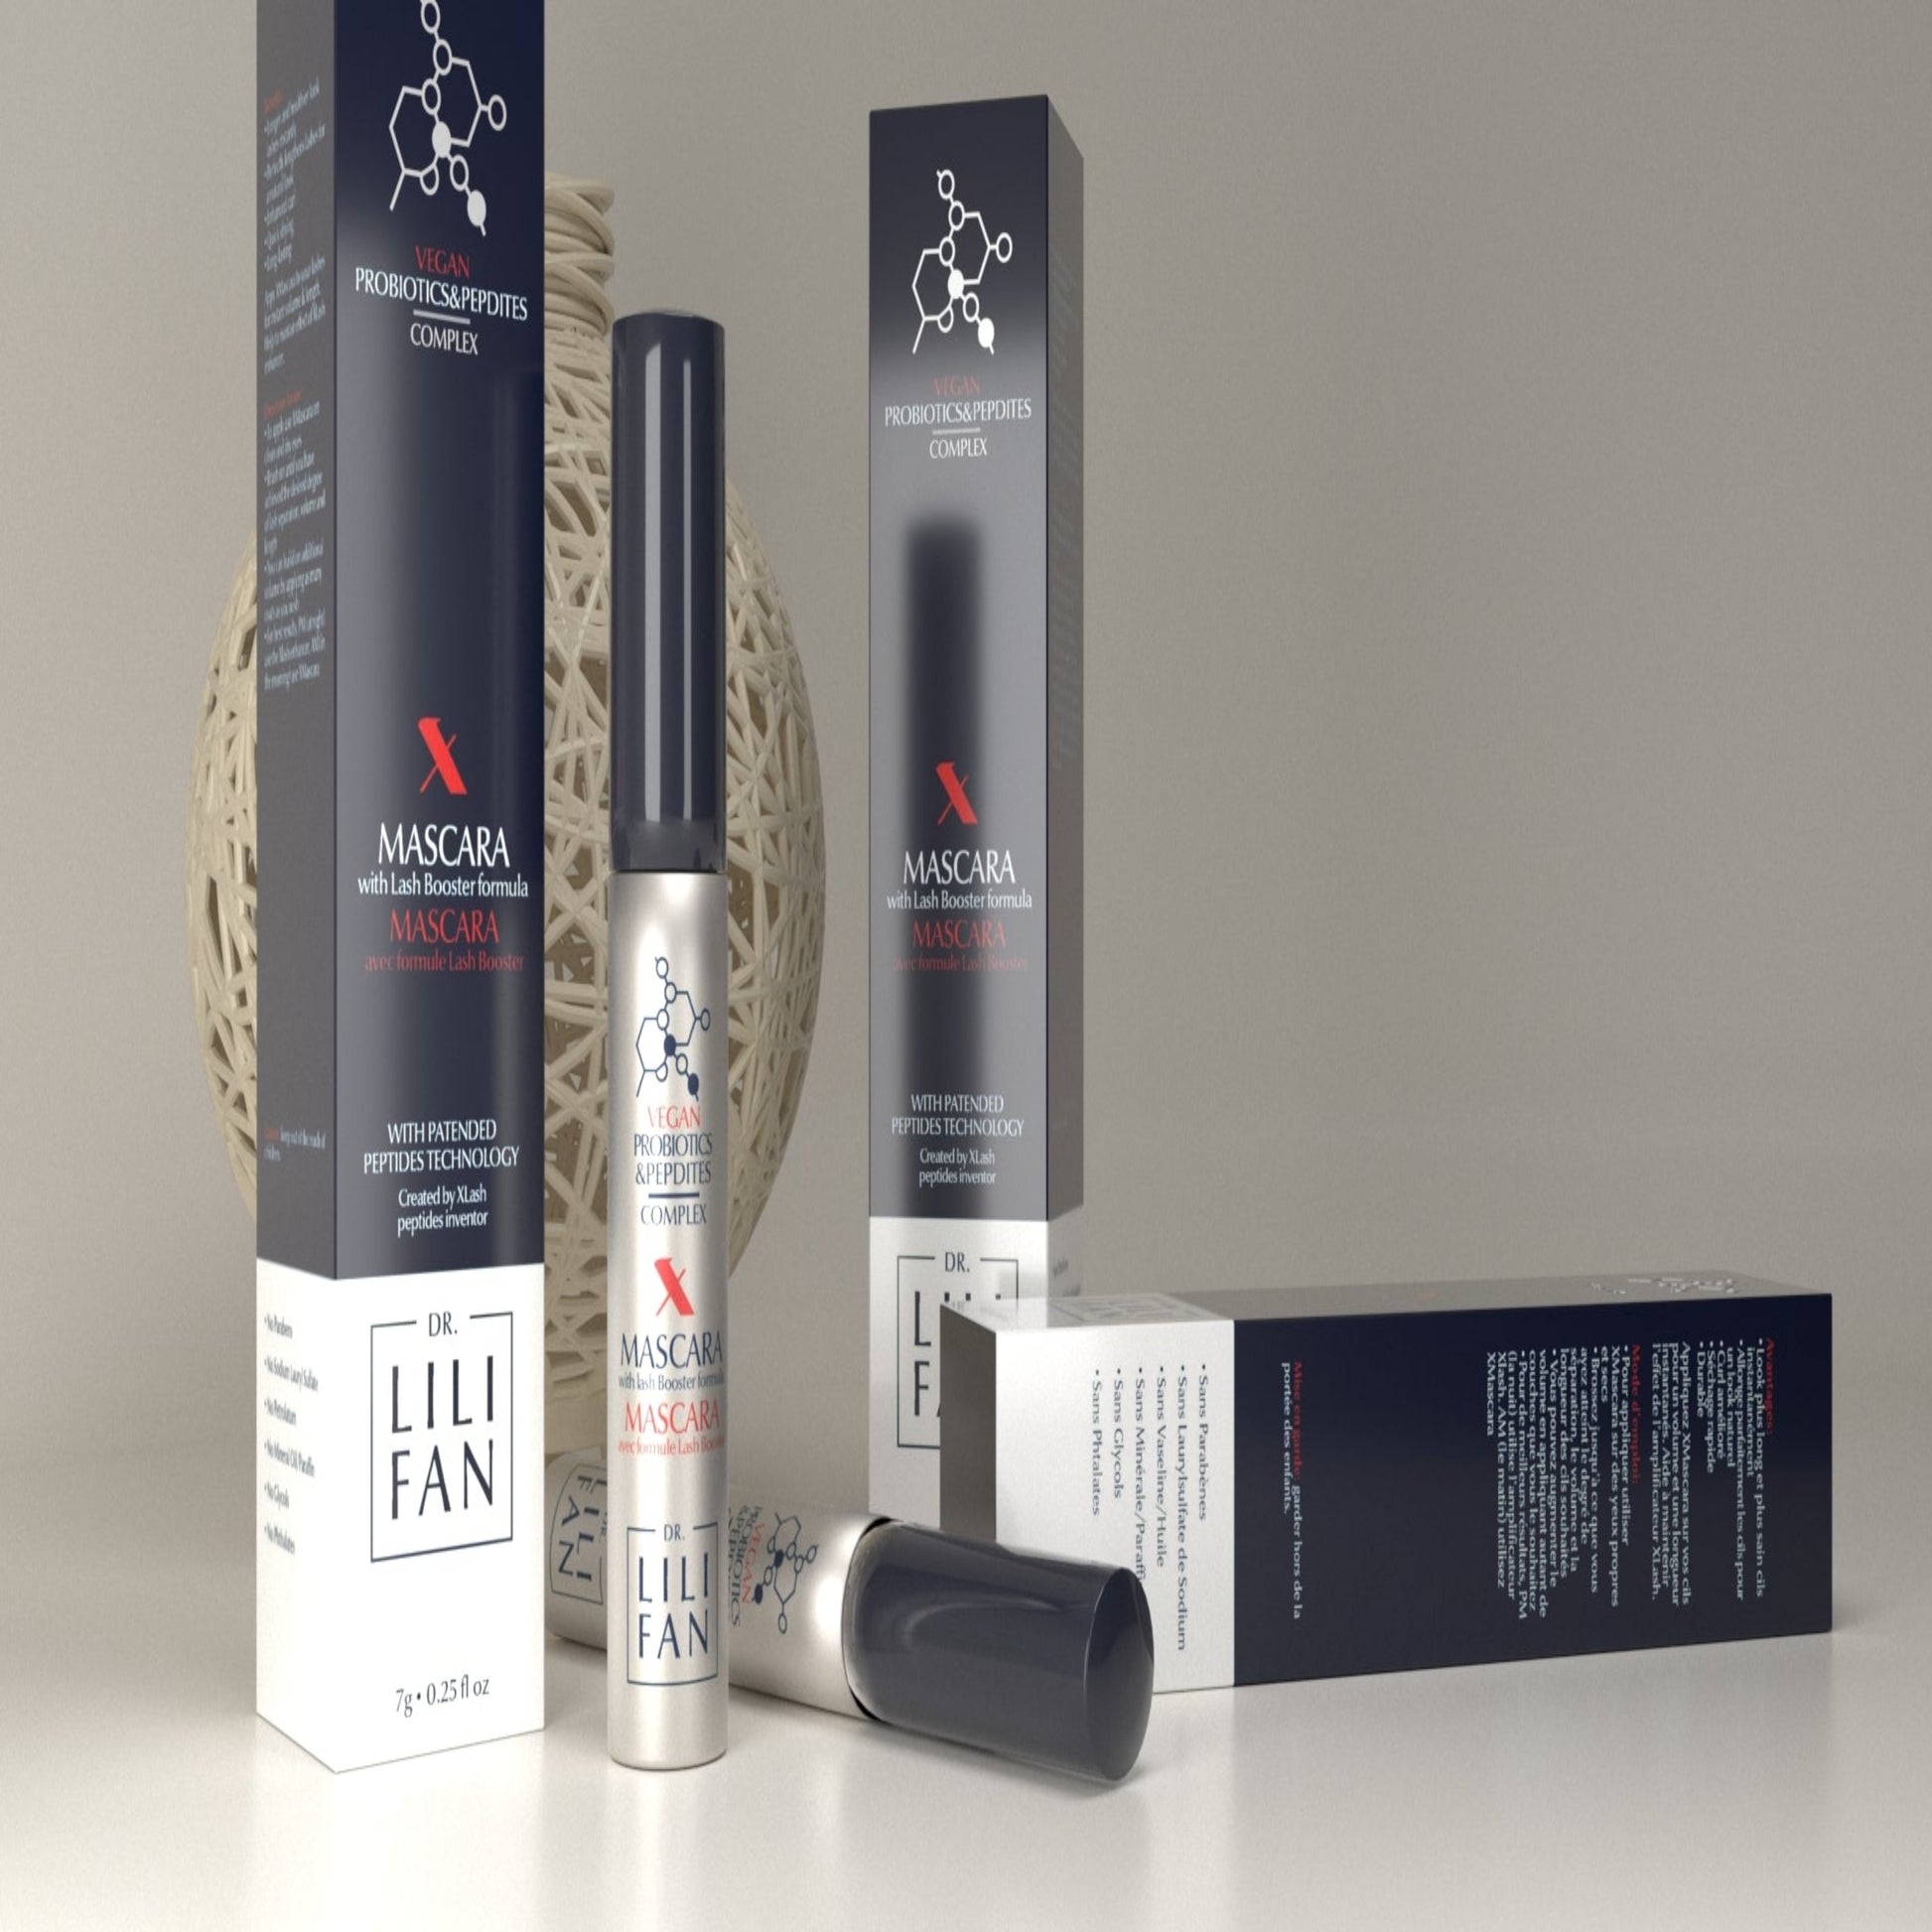 A tube of xmascara with its box